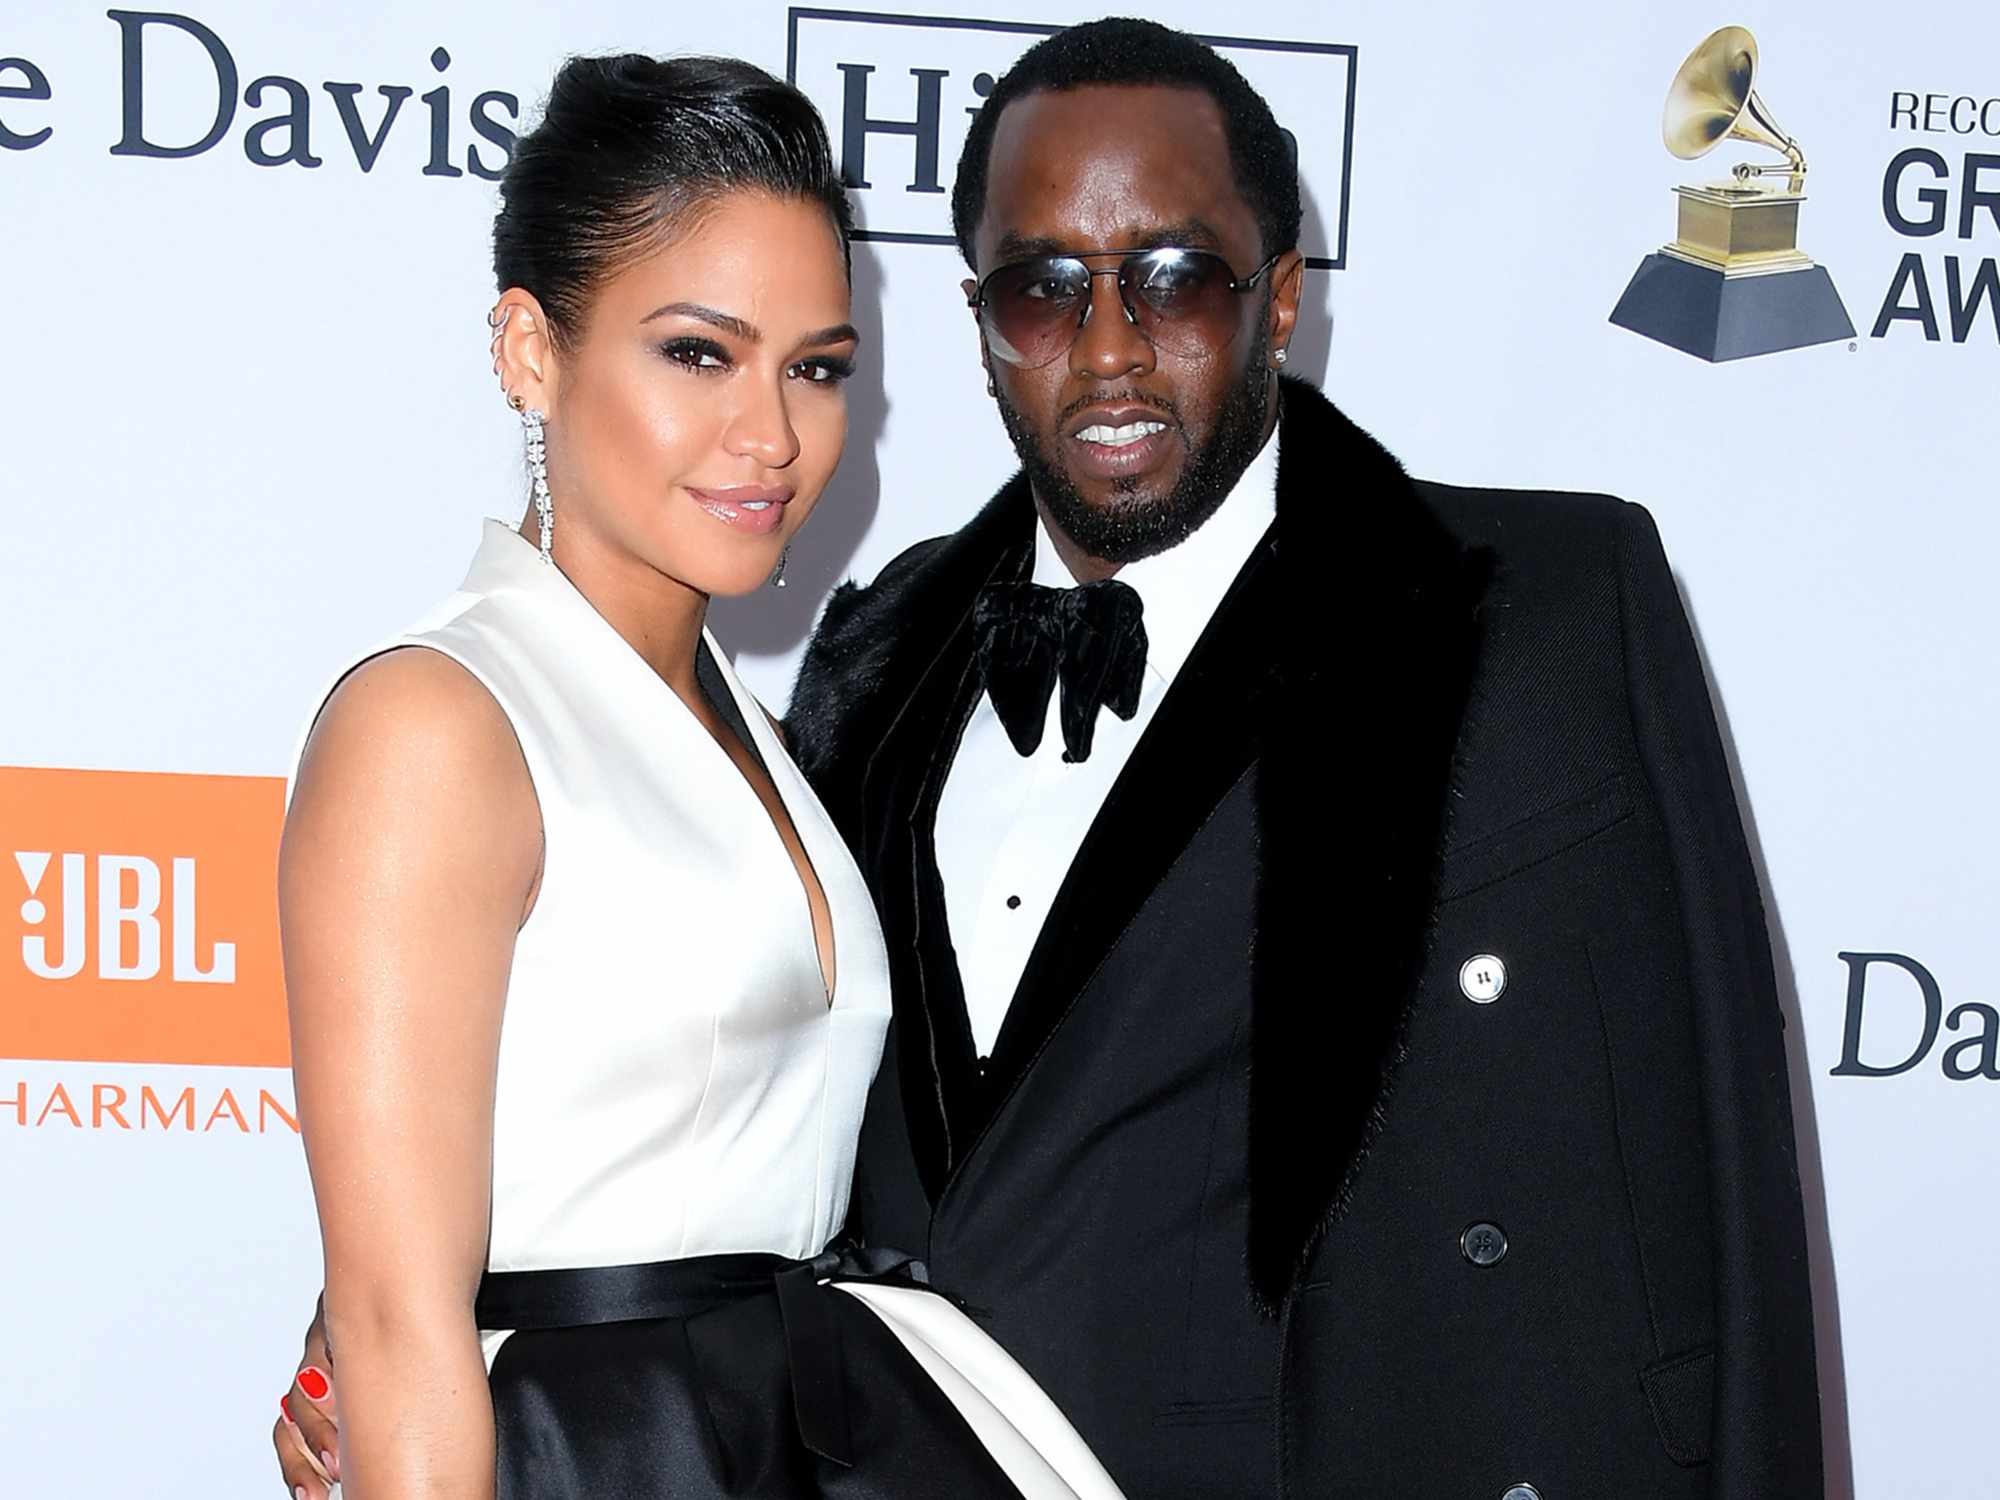 Cassie Ventura and Sean "Diddy" Combs attend the Clive Davis and Recording Academy Pre-GRAMMY Gala on January 27, 2018 in New York City. 